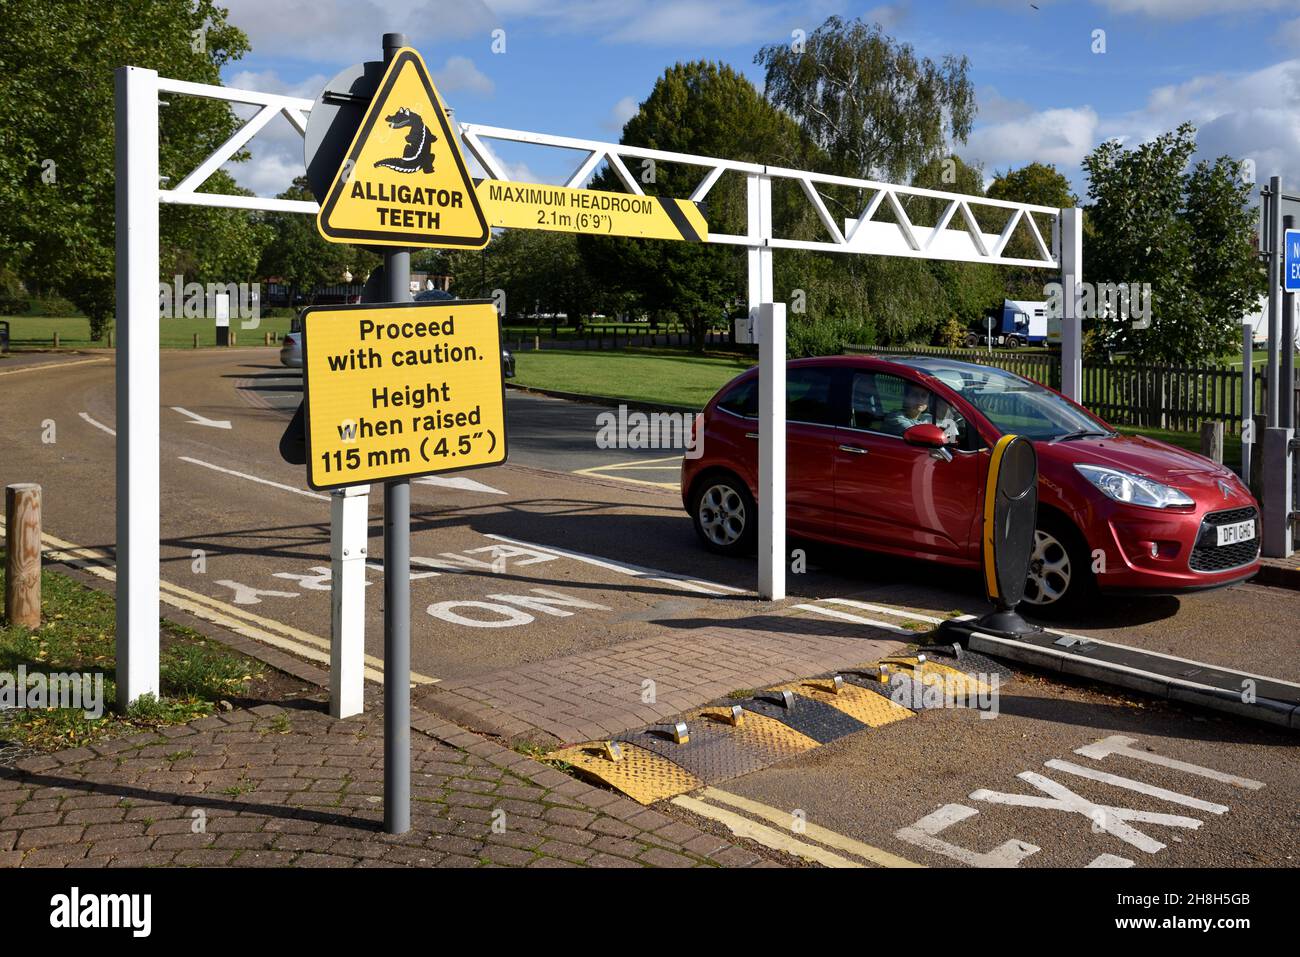 Car Entering Car Park & Sign for Alligator Teeth Traffic Control System or Traffic Direction Enforcers at Entrance or Exit to Car Park Stock Photo